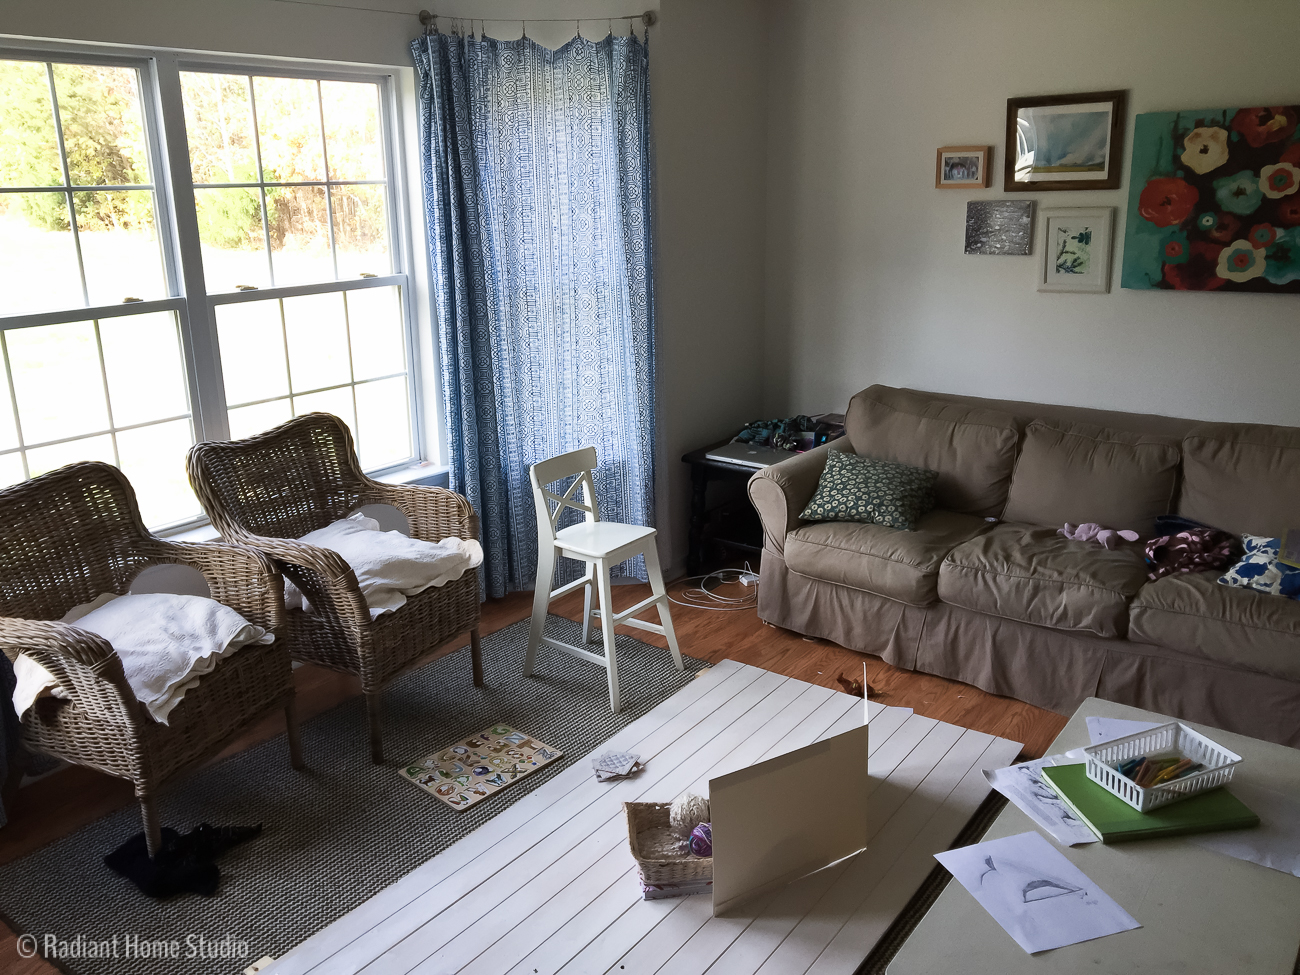 Behind-the-Scenes: What My House Really Looks Like When I Take Blog Photos | Radiant Home Studio